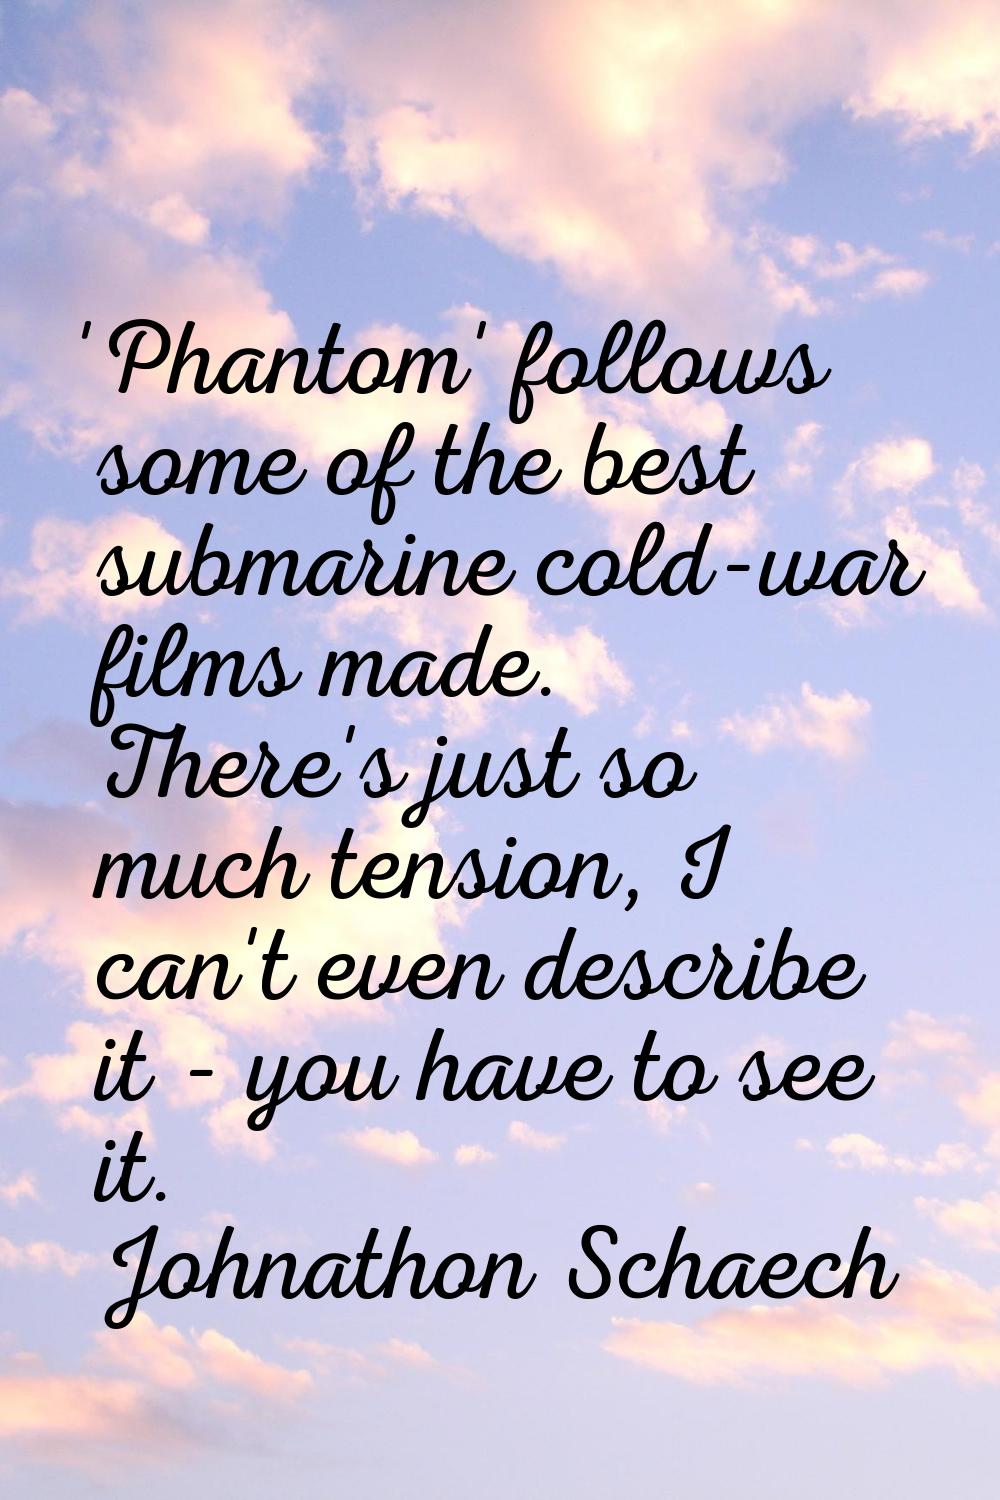 'Phantom' follows some of the best submarine cold-war films made. There's just so much tension, I c